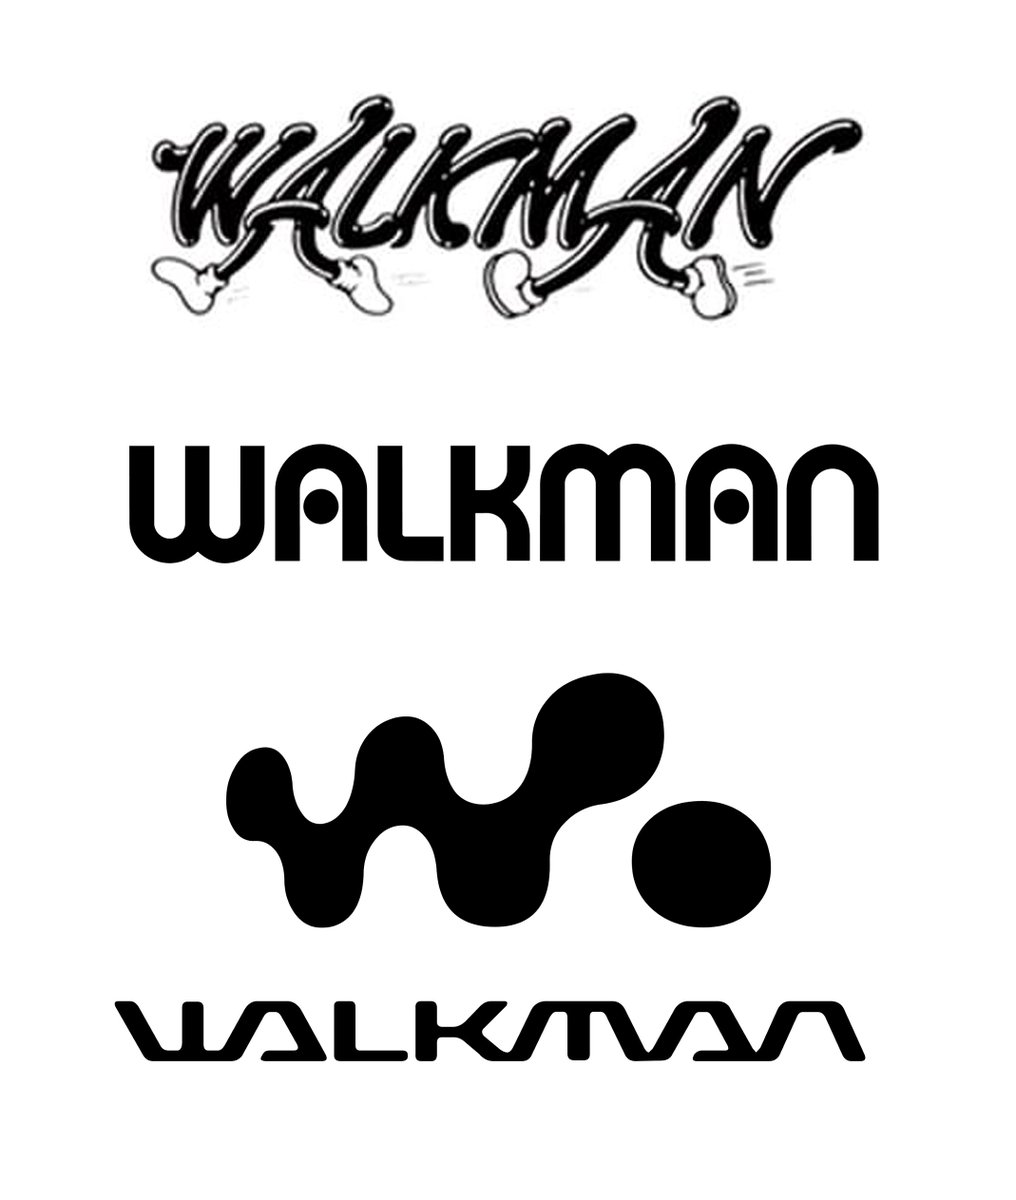 Released by Sony in the late 1970s, Walkman revolutionized portable music. Its logo evolved from a handwritten style in 1979 to a sleek design in 1981 by Hiroshige Fukuhara. In 2000, it evolved, maintaining its iconic status with a futuristic yet balanced design.